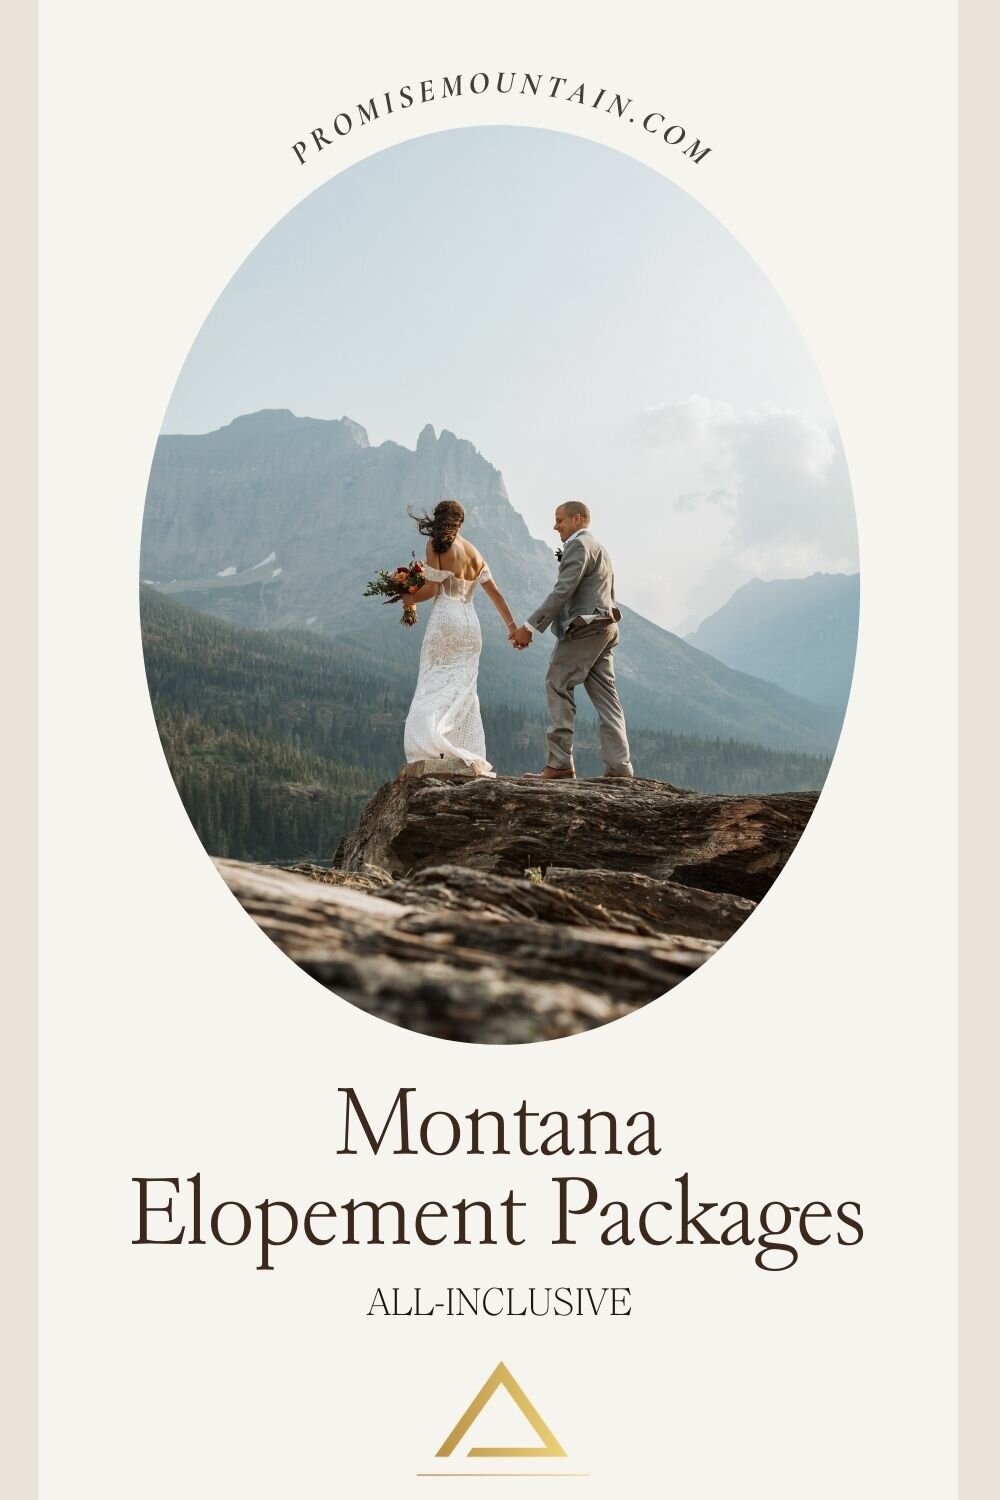 Couple hold hands as the bride holds her bouquet on a mountain top during their Montana elopement; image overlaid with text that reads Montana Elopement Packages All-inclusive